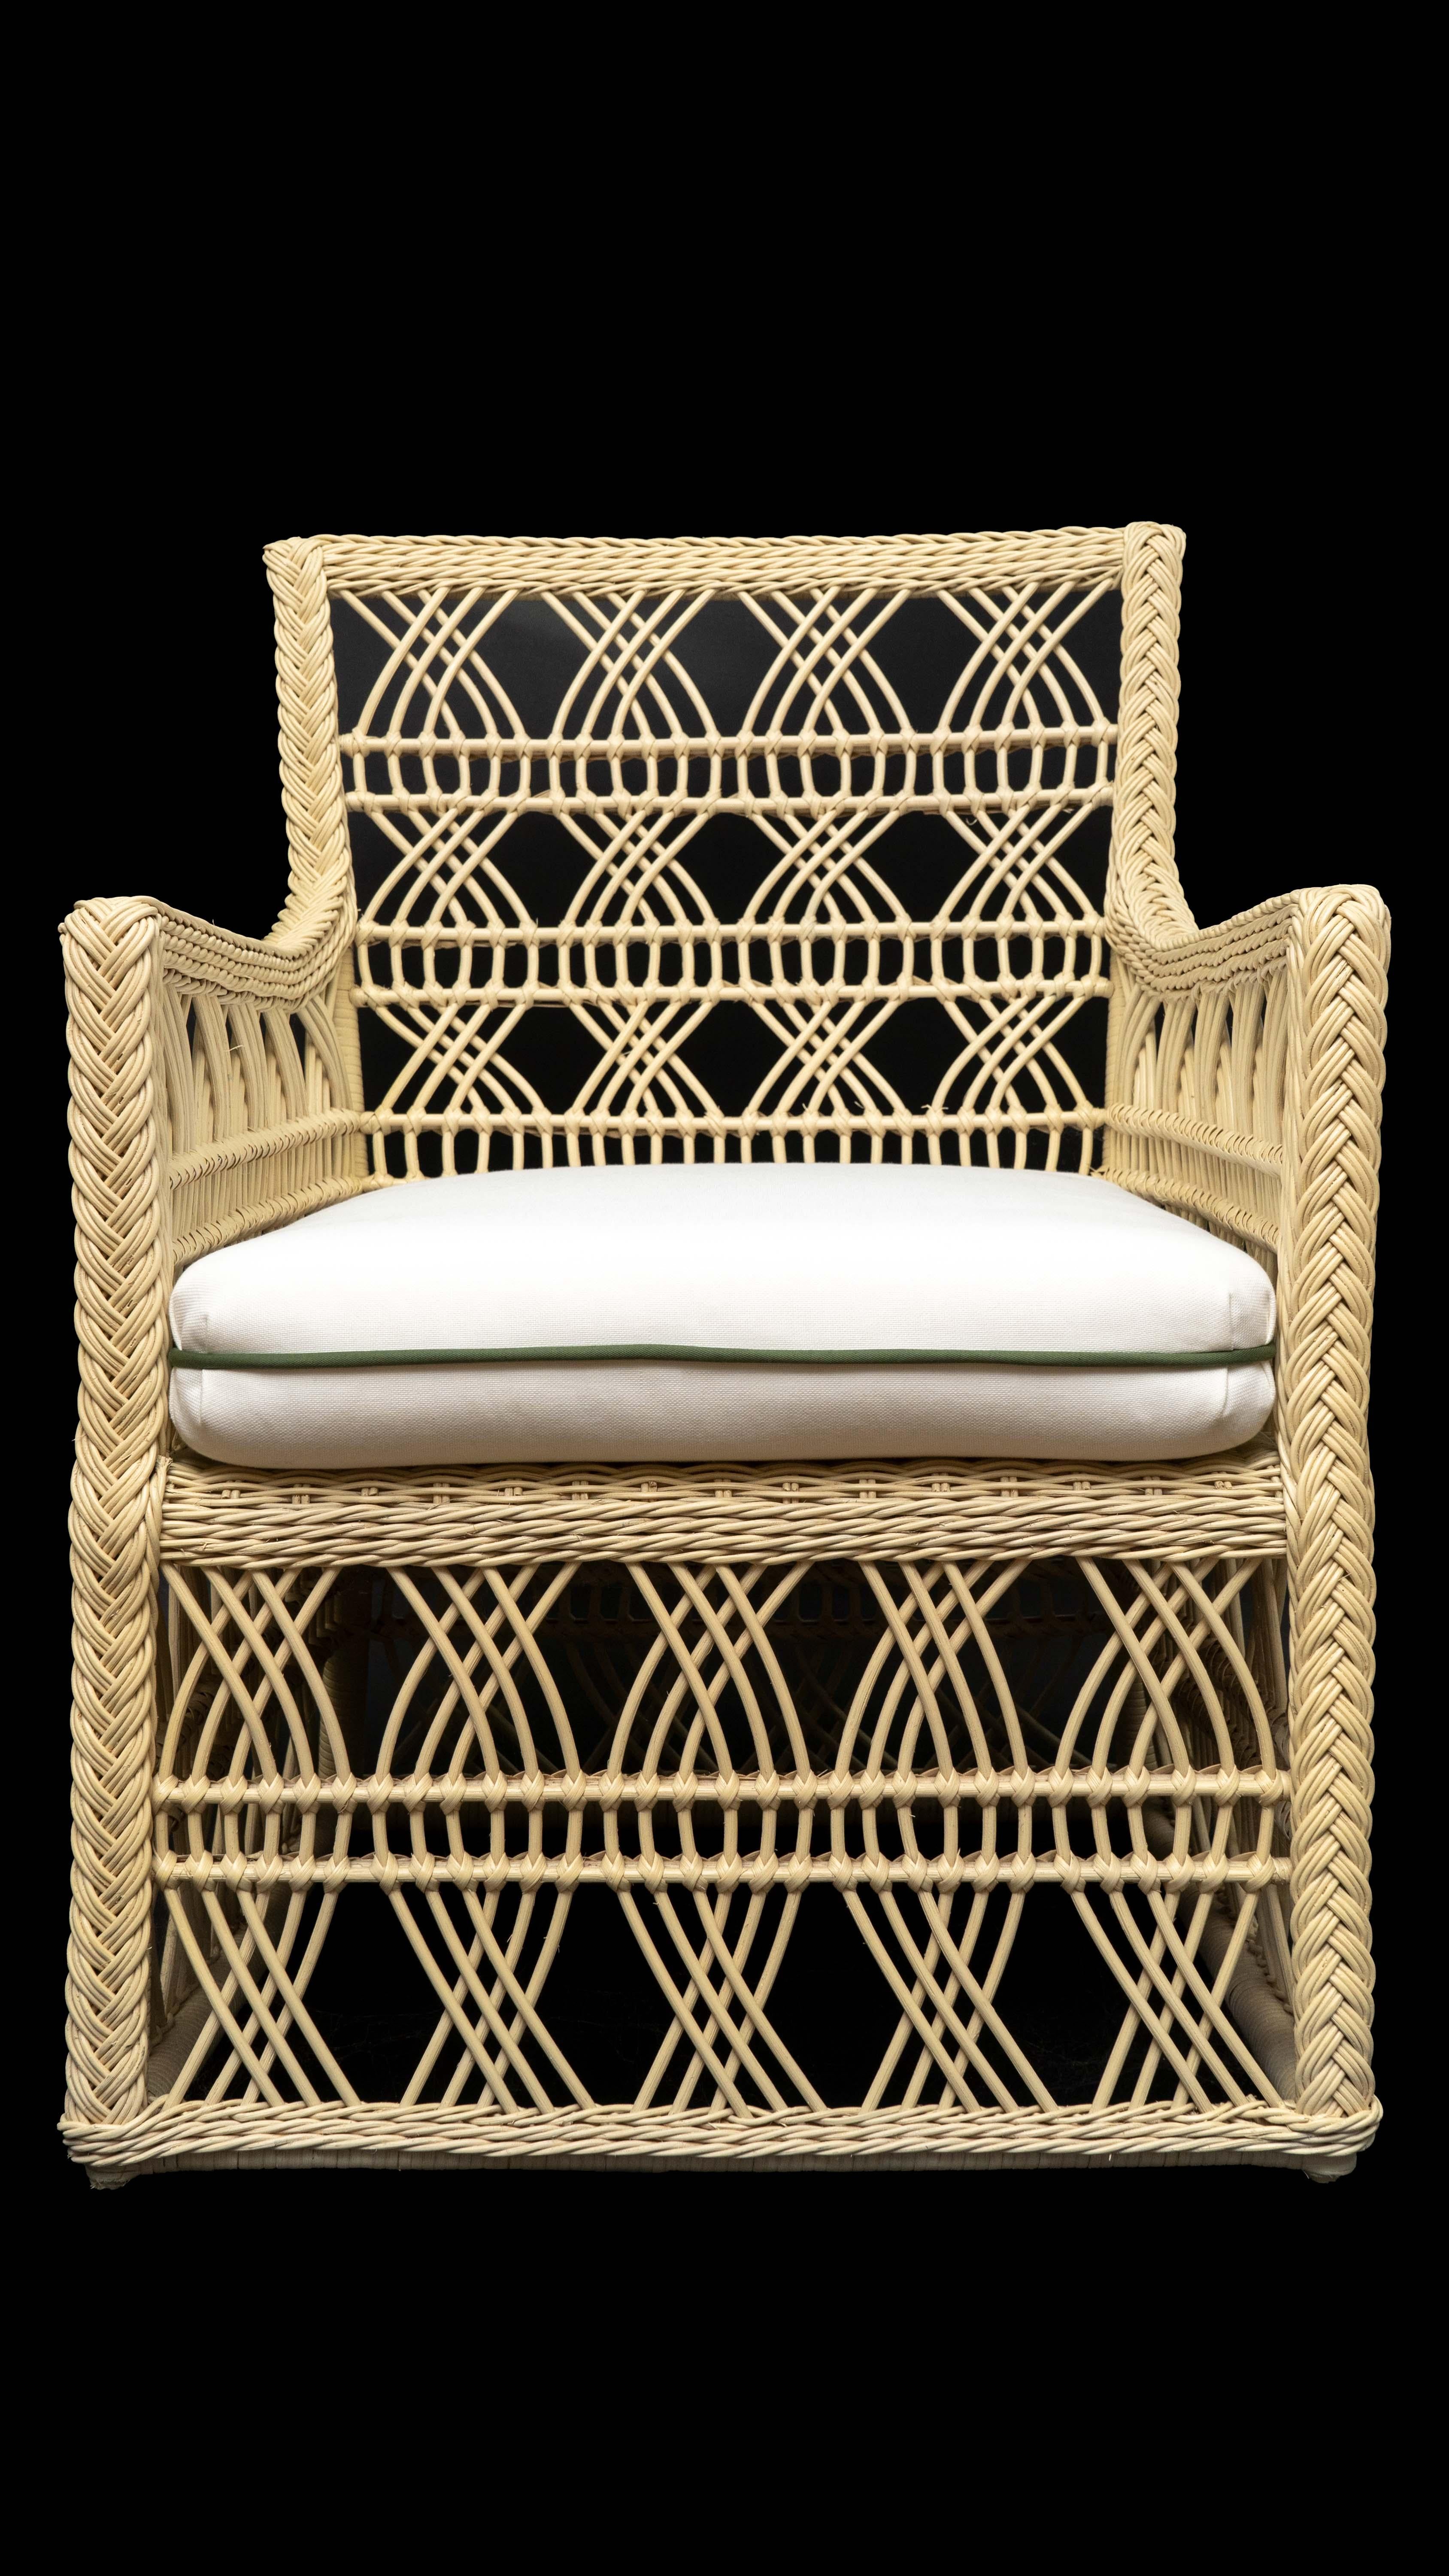 Rattan Trellis chair made for Creel and Gow in Tangier Morocco

Measures: 29